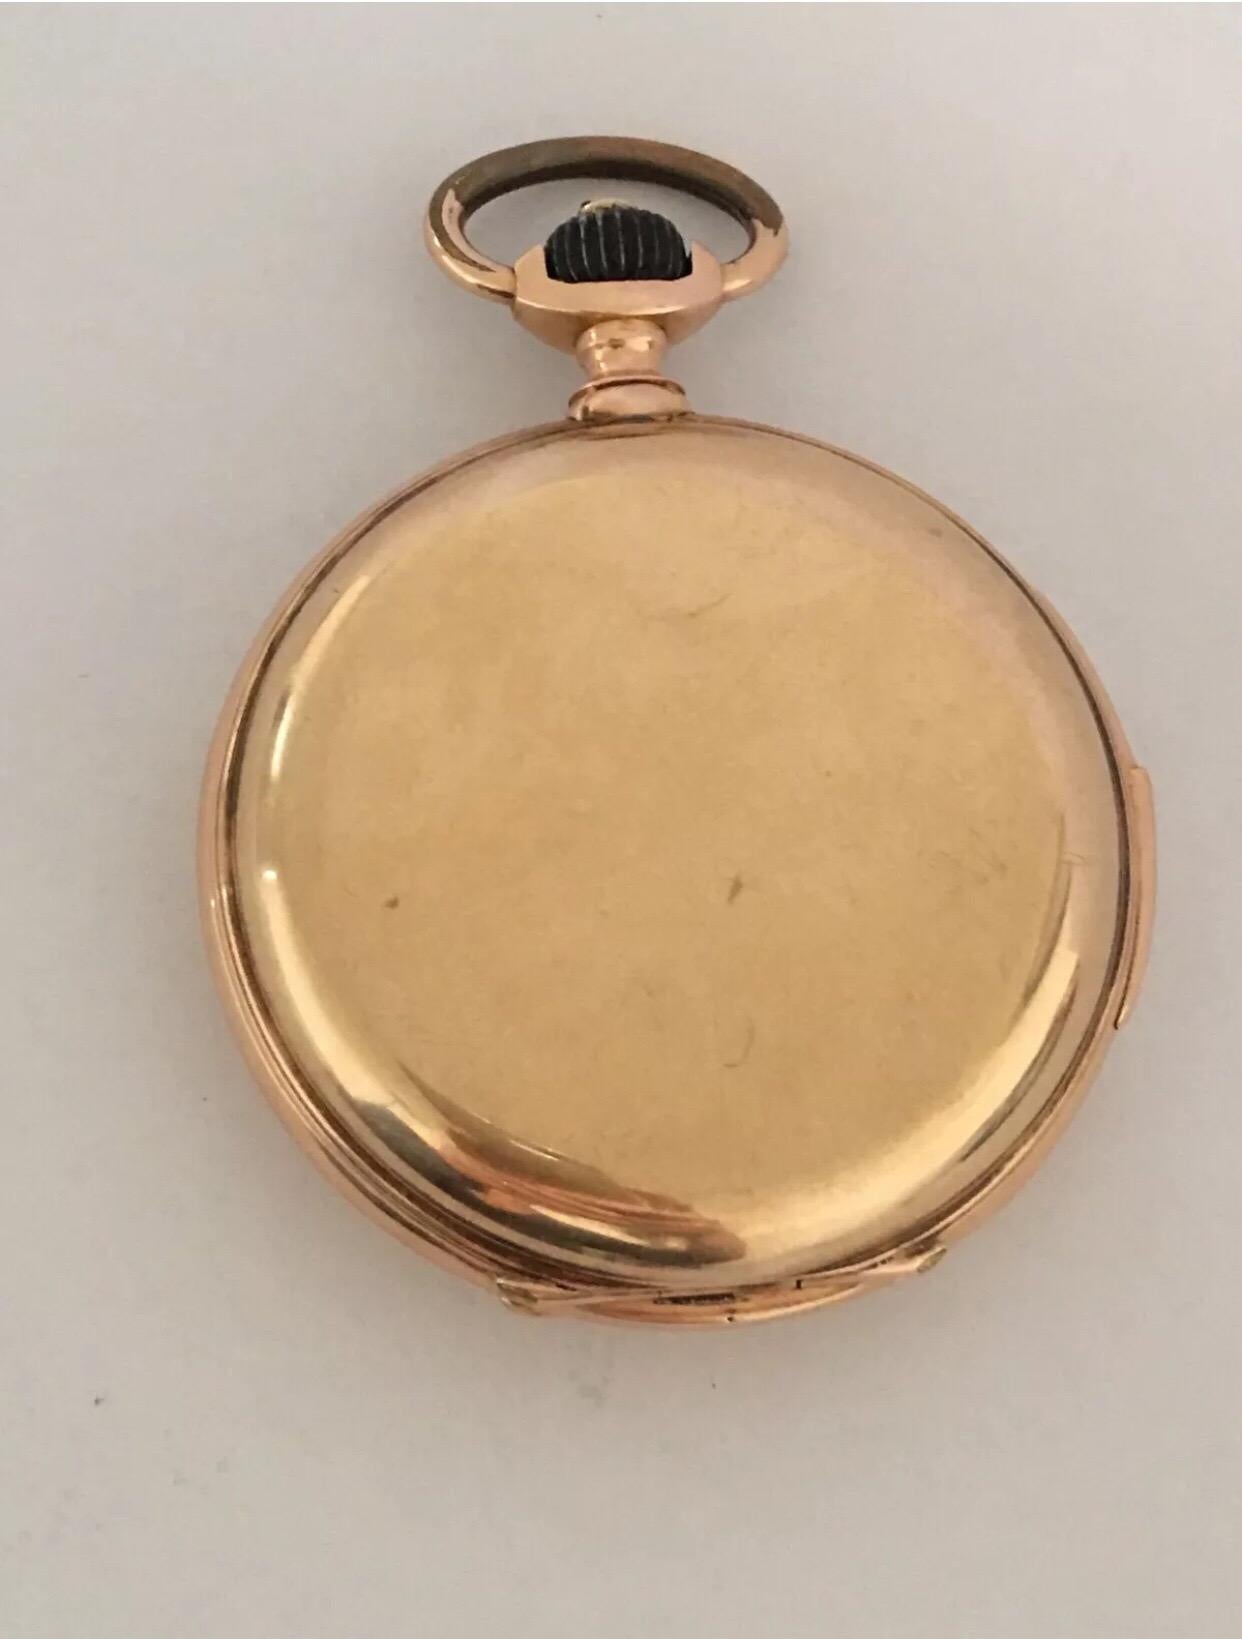 14K Gold Full hunter LeCoultre & Co Minute Repeater Antique pocket watch.

A lovely 14- karat Gold minute repeating antique pocket watch. In excellent working condition. A clean white enamel face with Arabic numerals and sub-seconds outer minutes, a